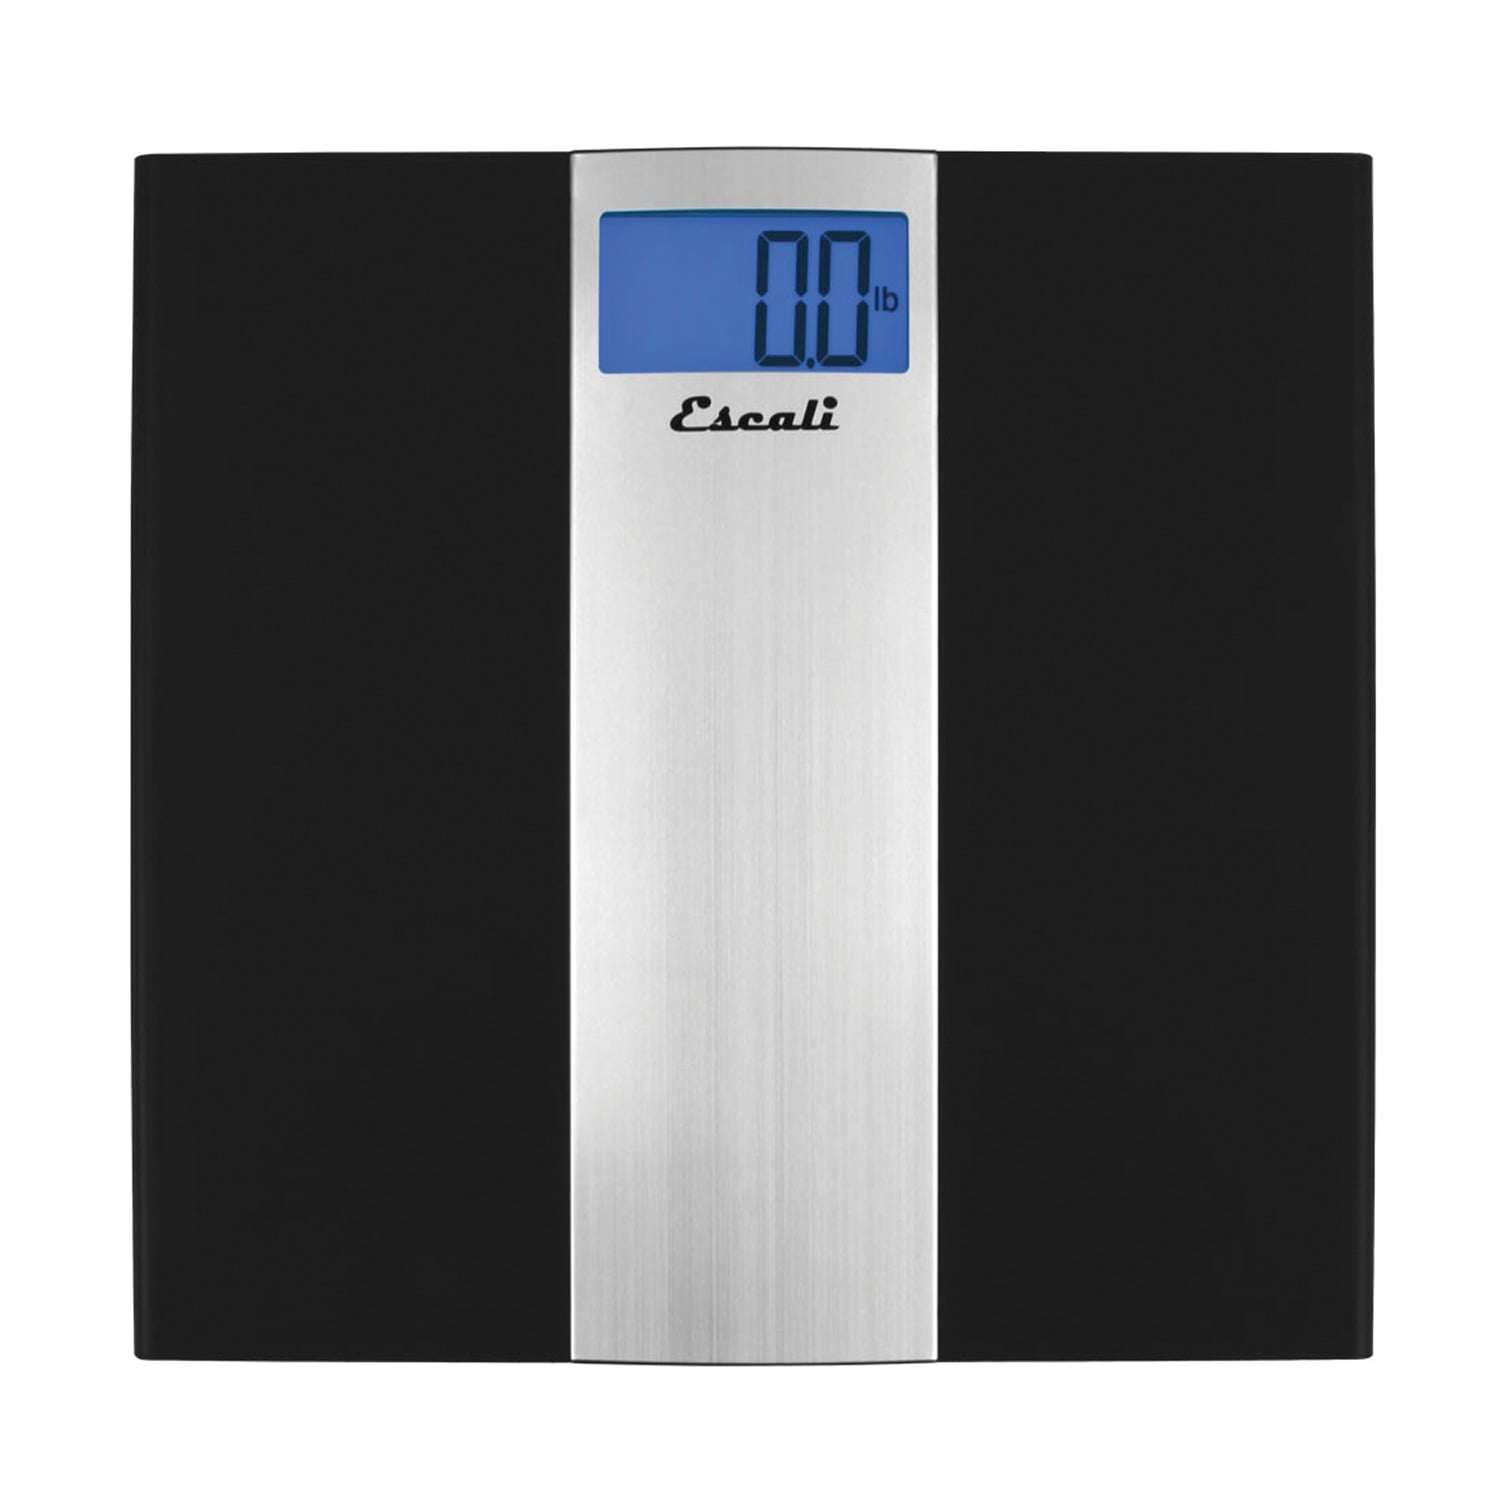 RIVIO 440 lb High Capacity Digital Body Weight Bathroom Scale with Large  LCD Backlight Display, Step-On Technology High Precision Measurements, 6mm  Tempered Gla…